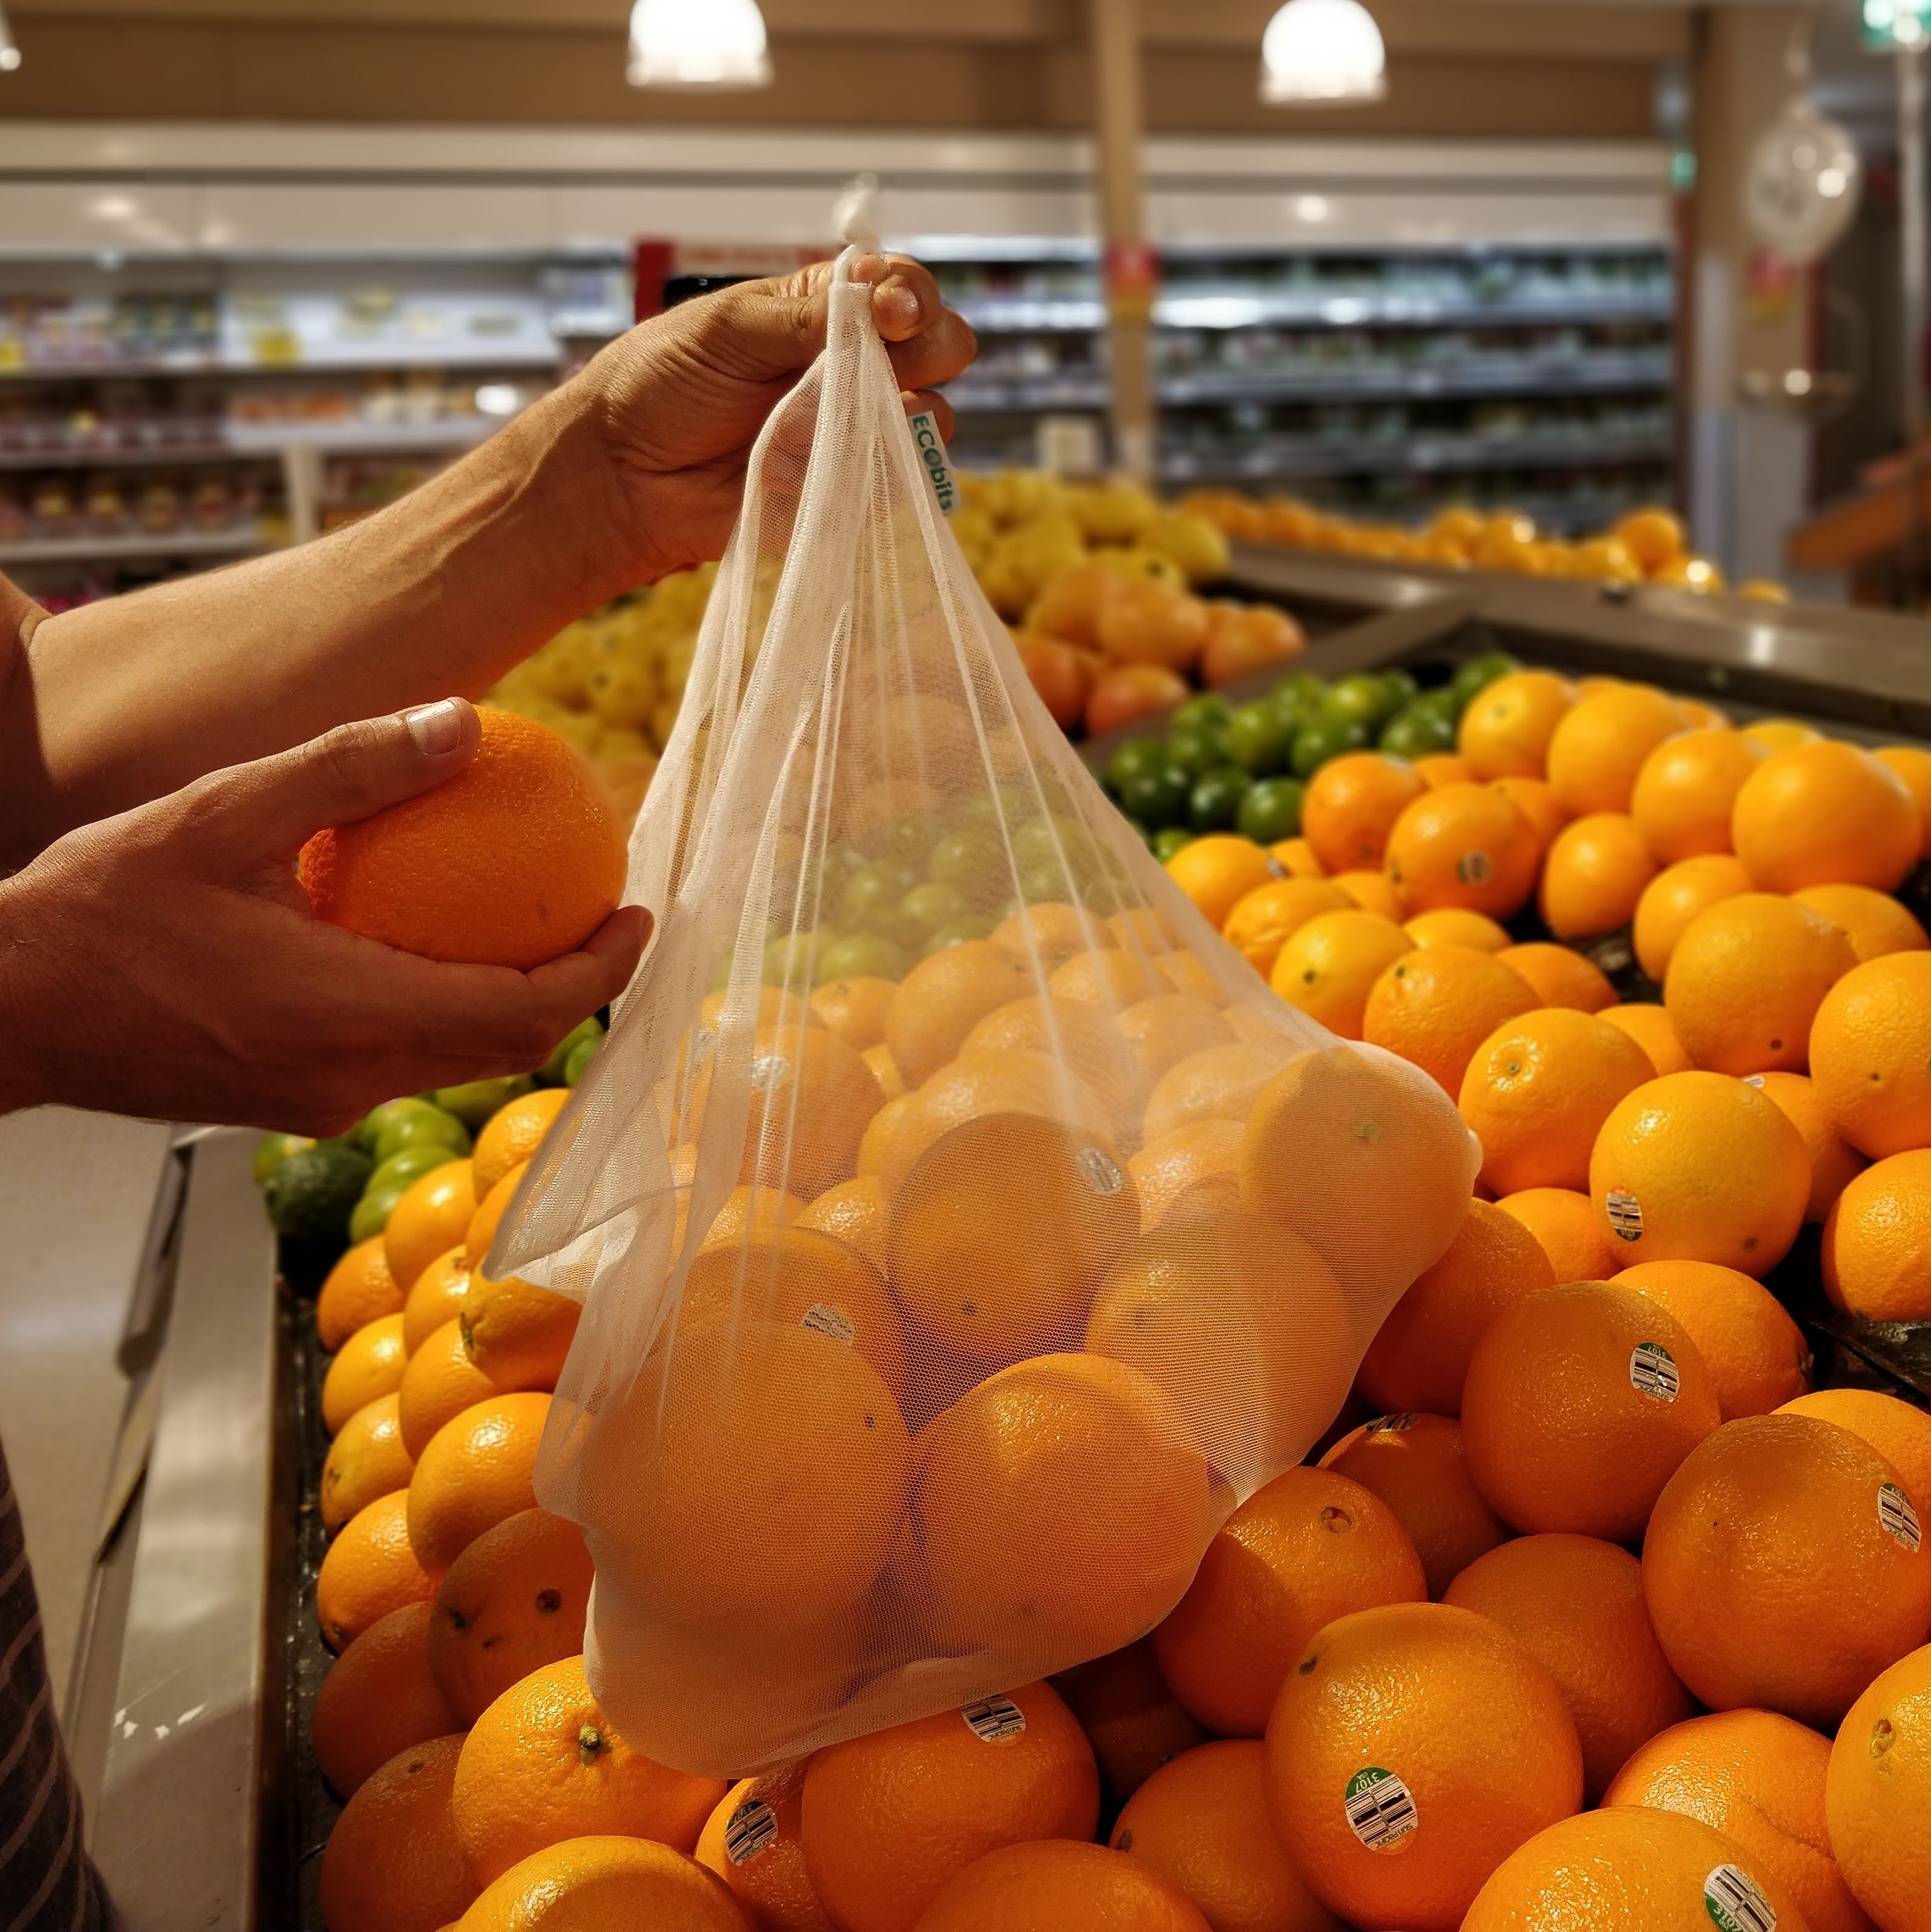 Coles to remove single-use plastic produce bags from stores in new trial